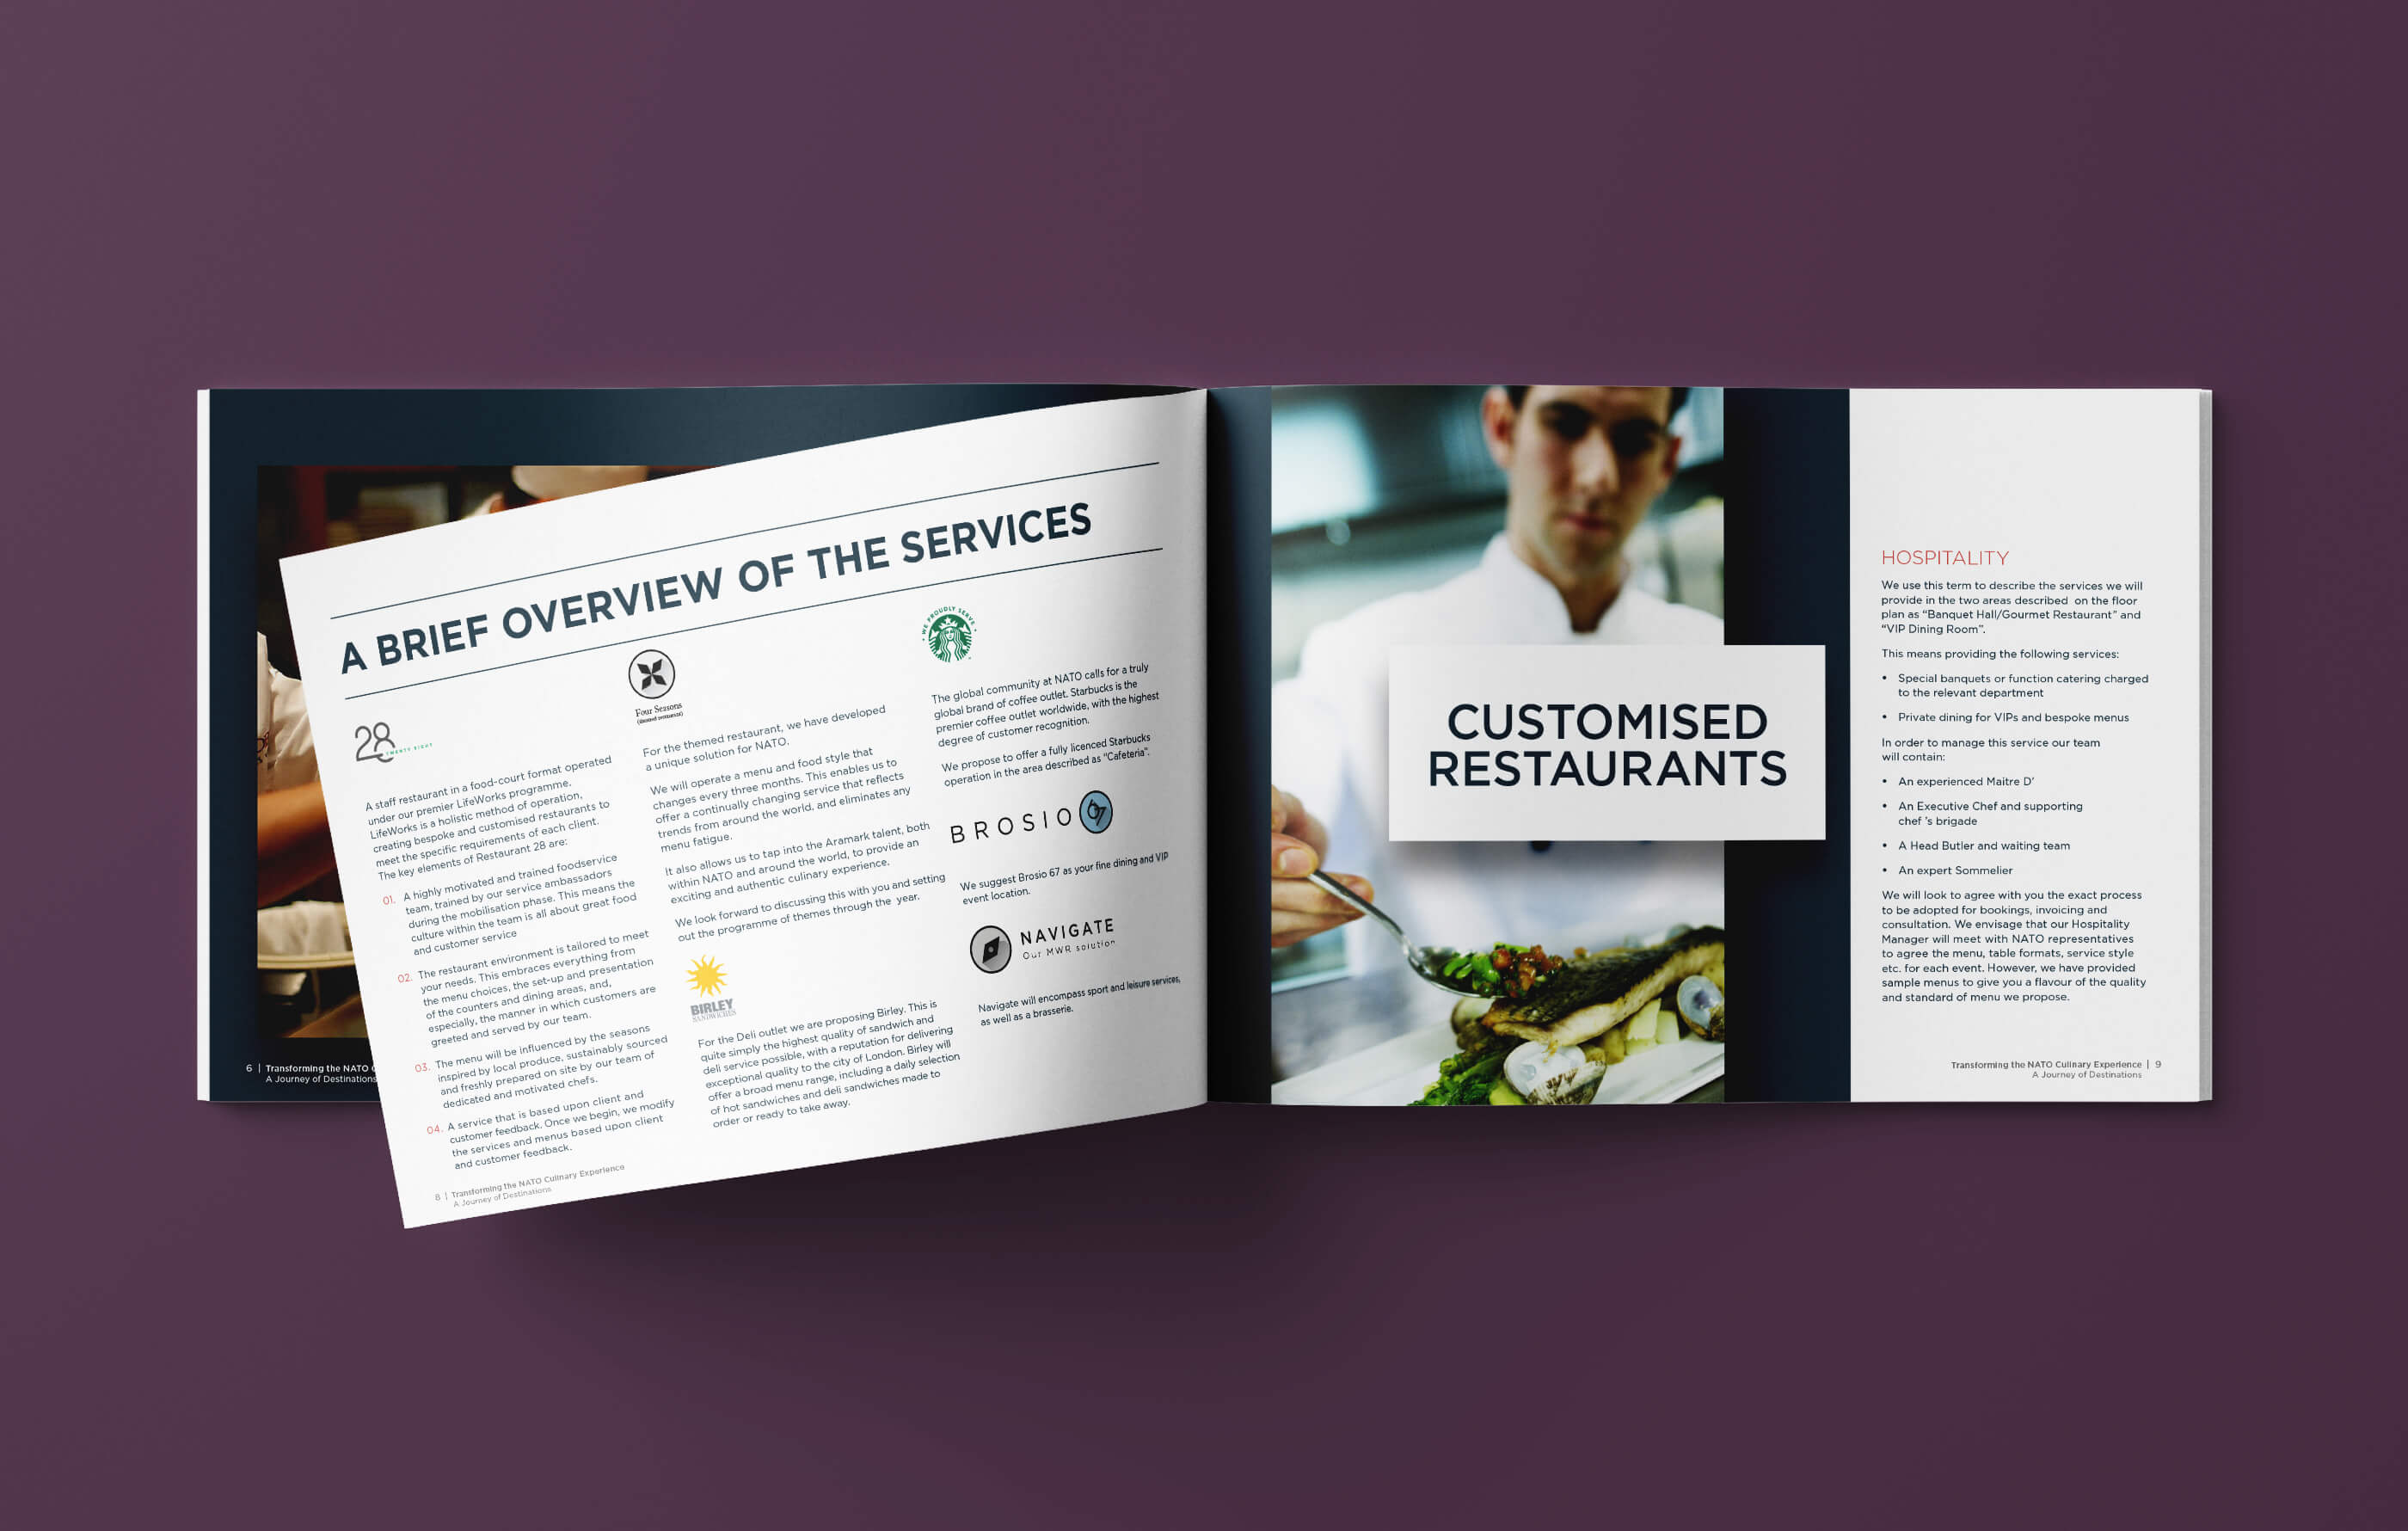 Double page spread of the A4 landscape brochure on a purple background, outlining Aramark's services including restaurants and hospitality